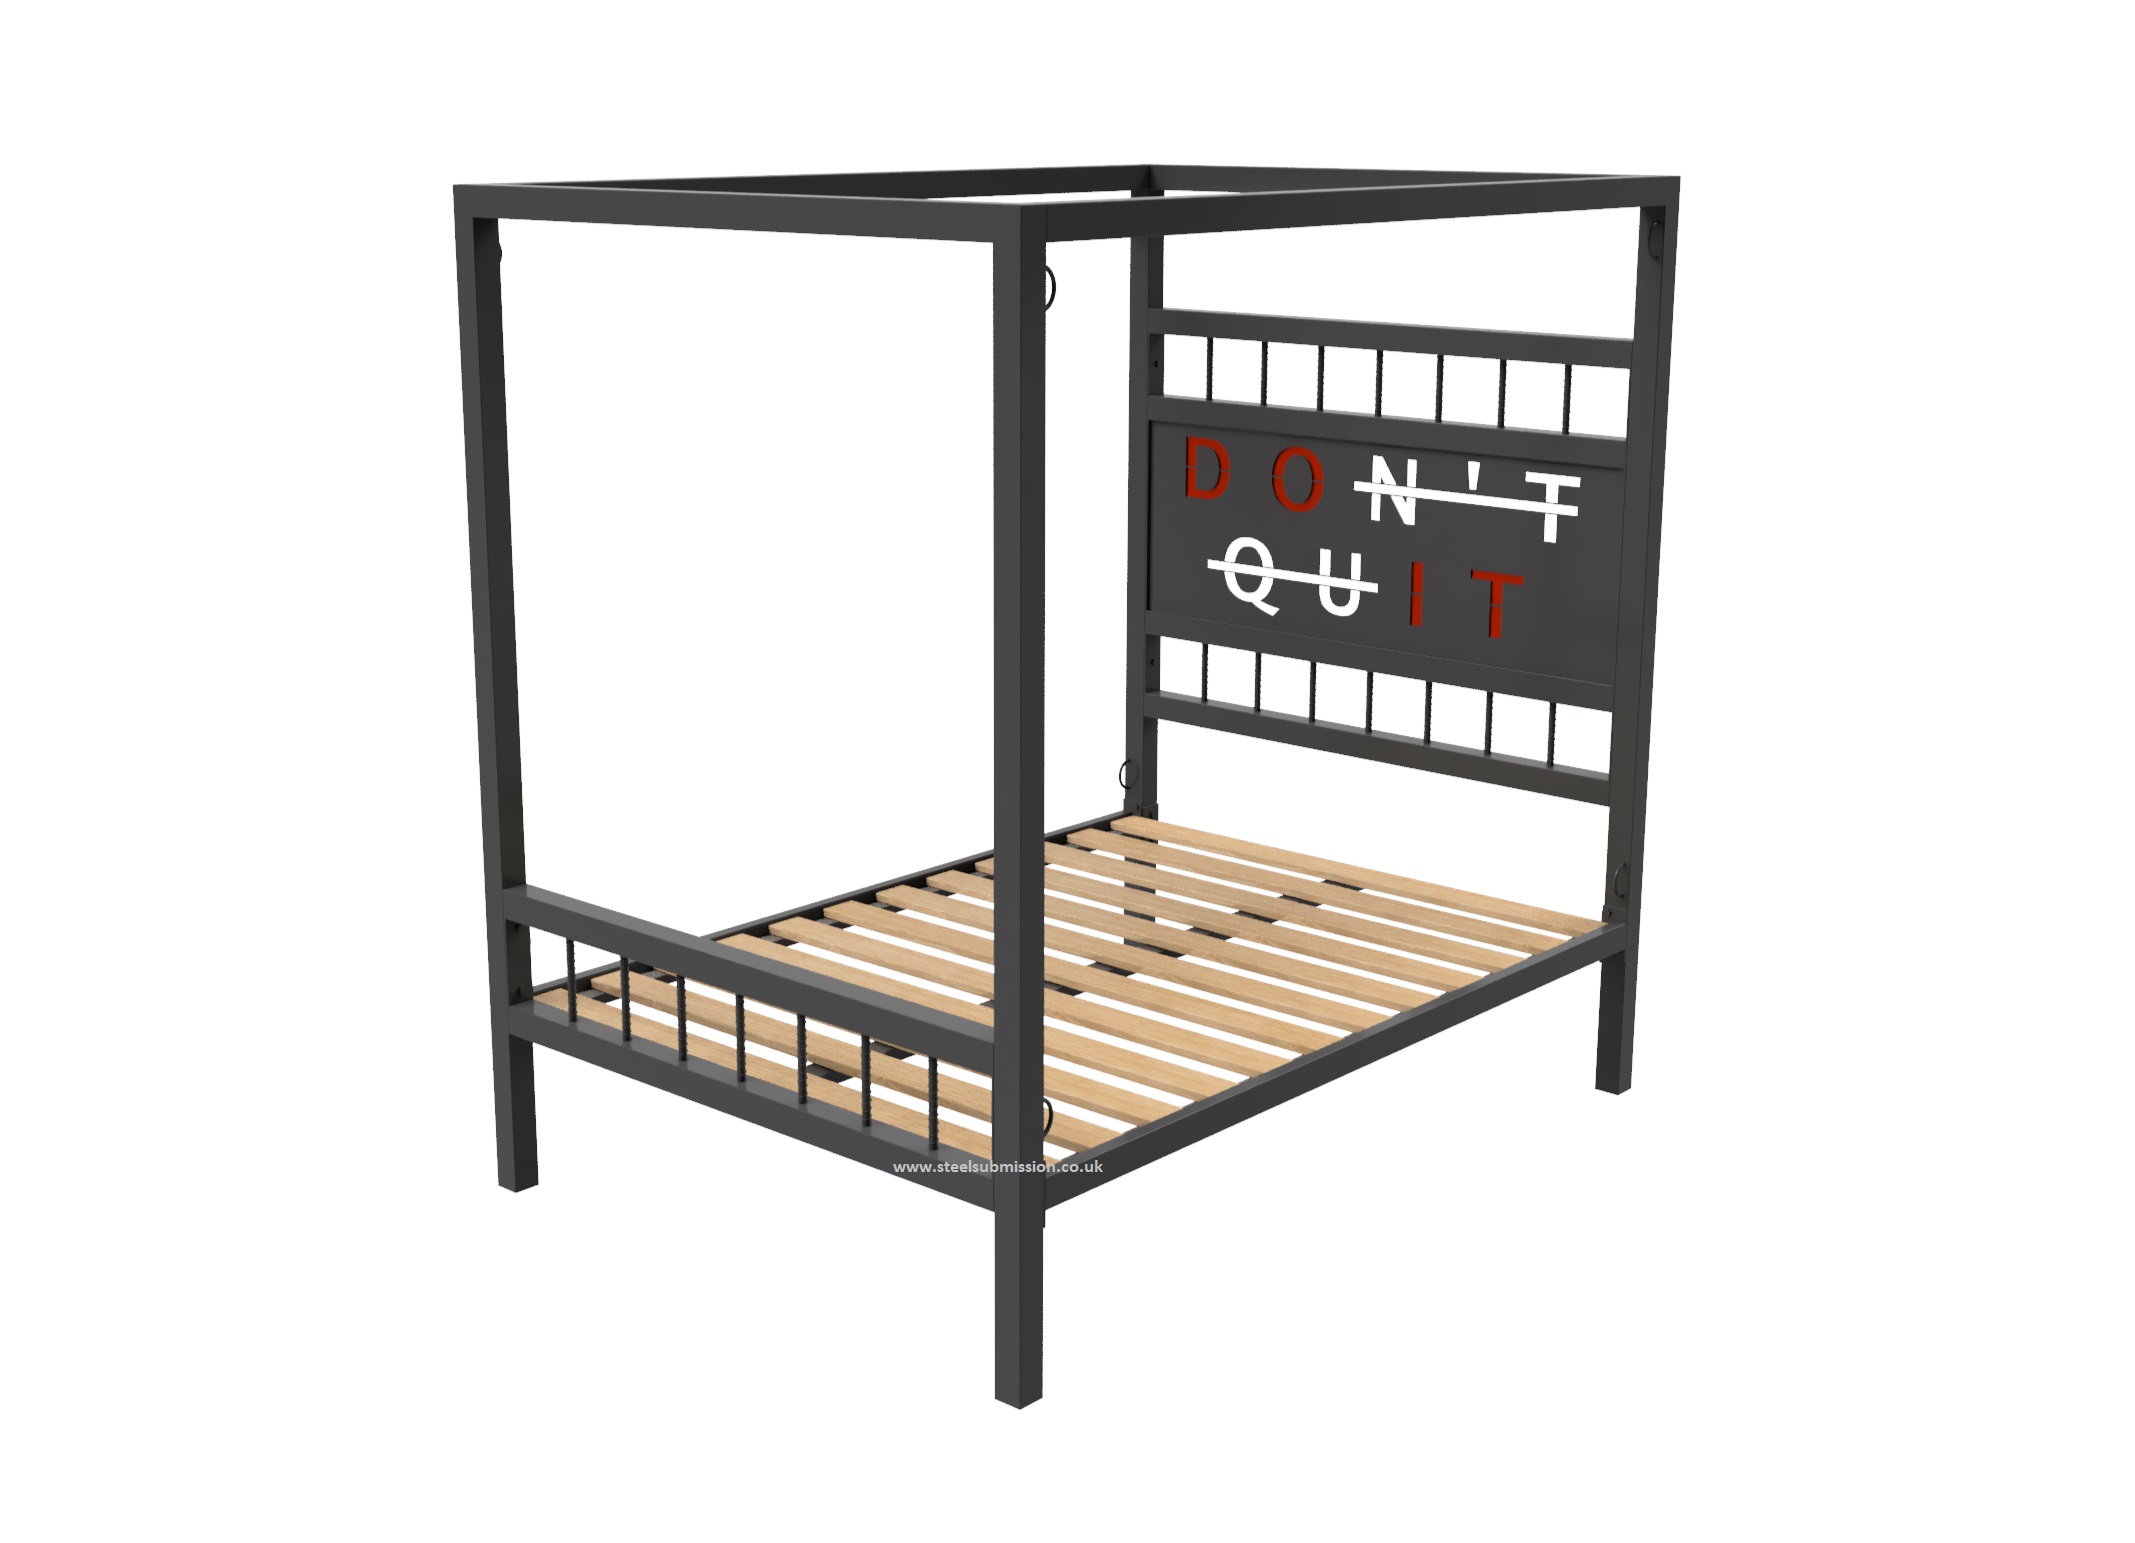 becky fann recommends bdsm bed frame pic